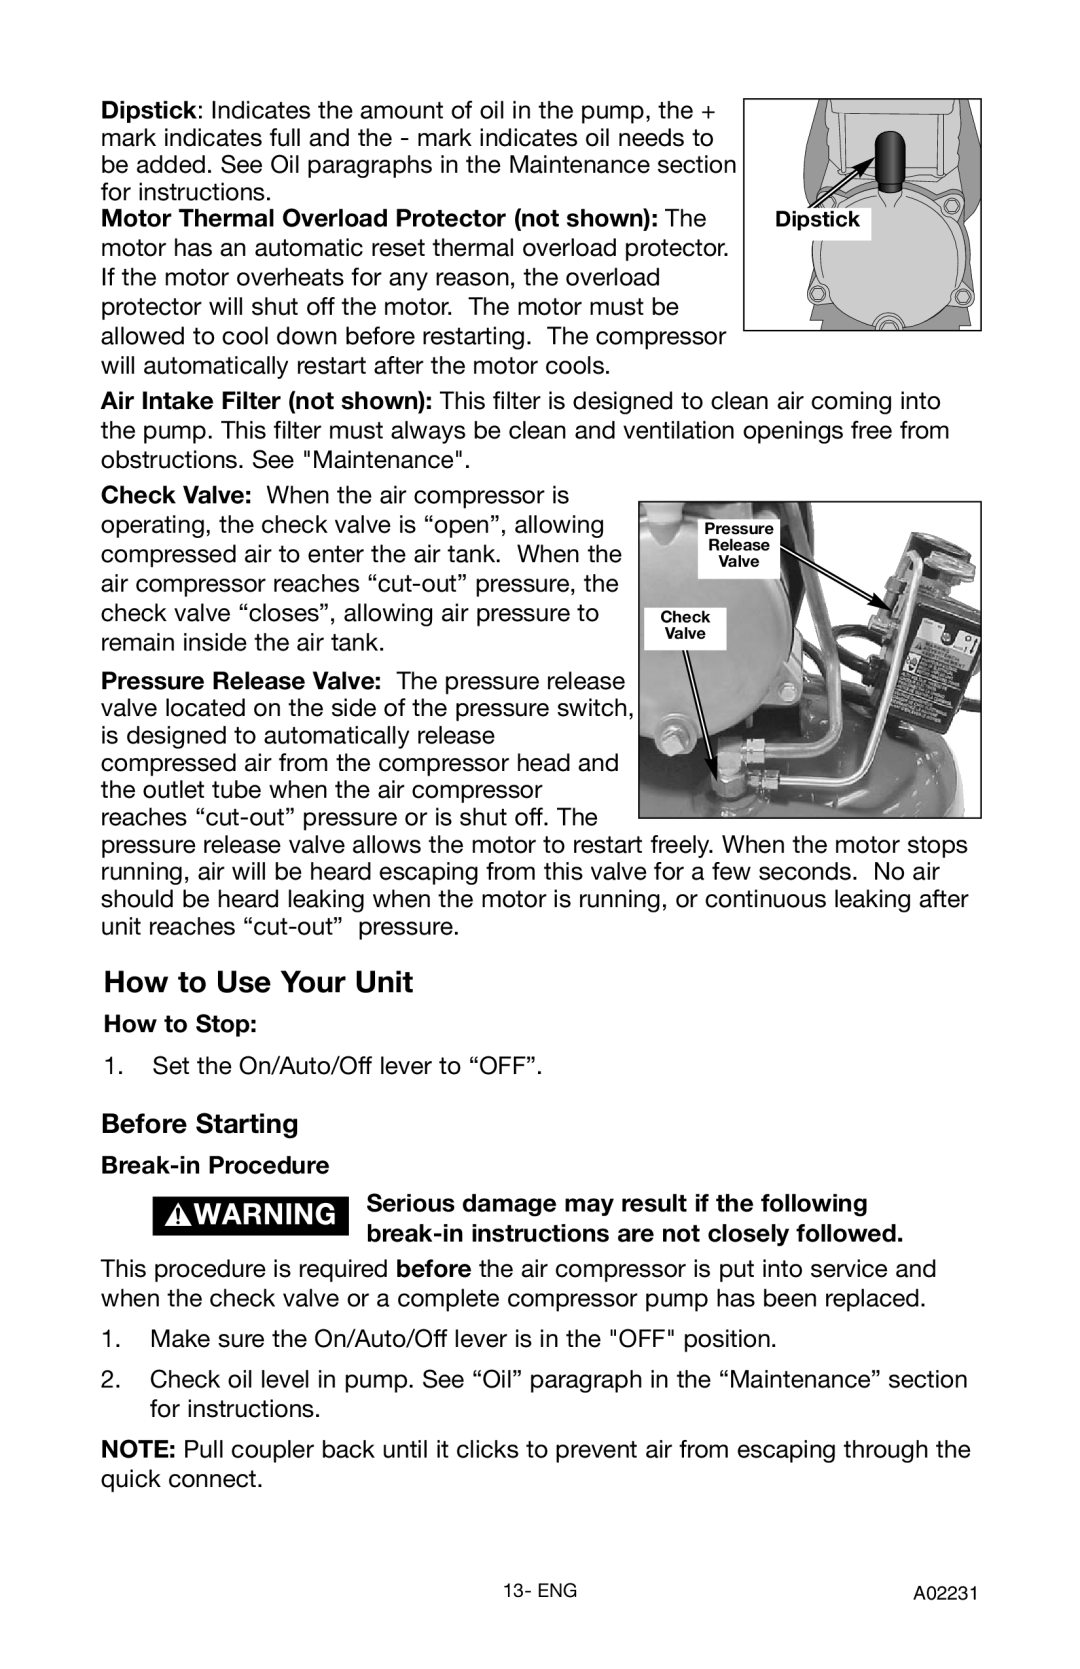 Porter-Cable CPLDC2540P instruction manual How to Use Your Unit, Before Starting 